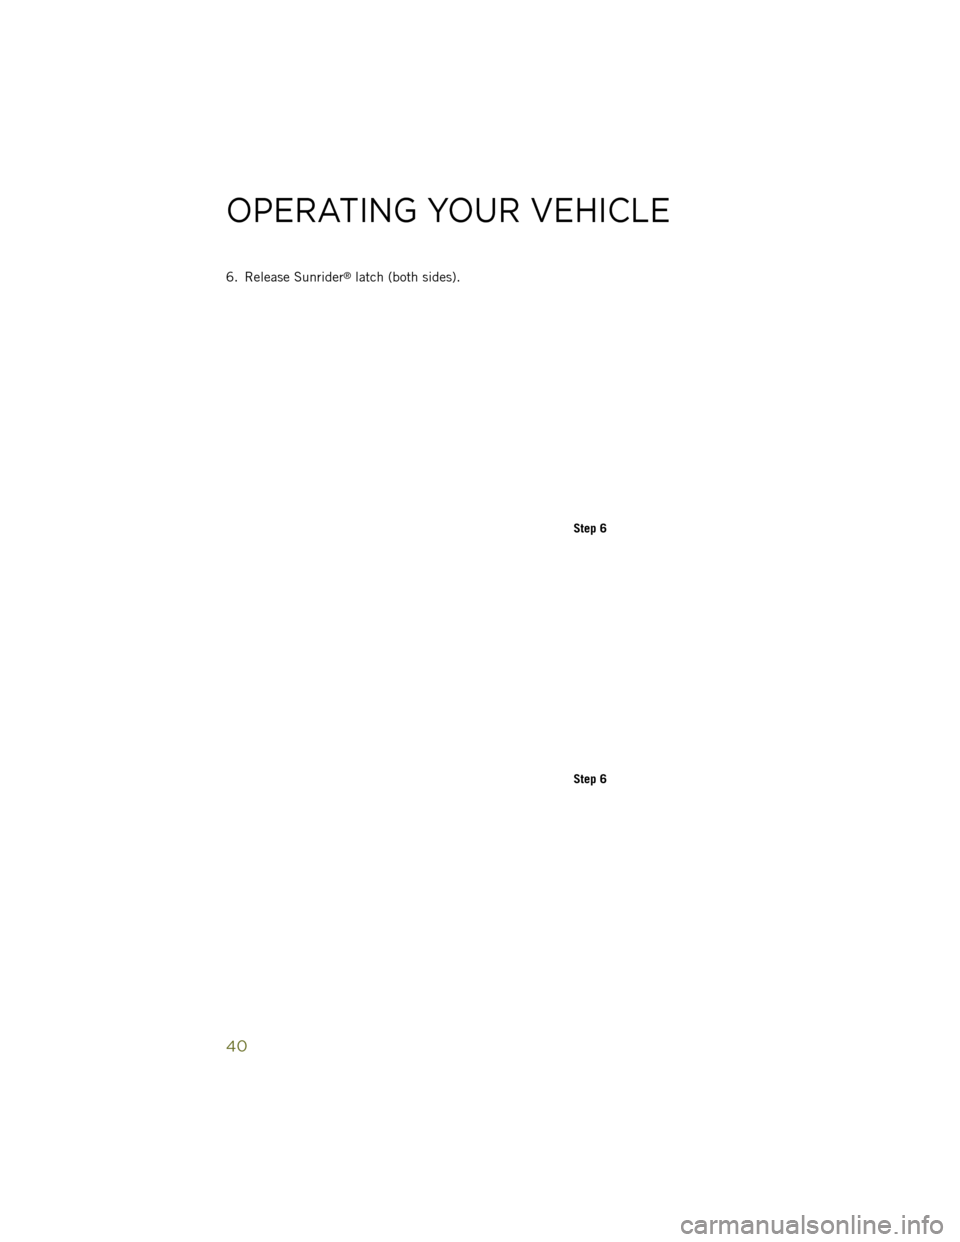 JEEP WRANGLER 2014 JK / 3.G Service Manual 6. Release Sunrider®latch (both sides).
Step 6
Step 6
OPERATING YOUR VEHICLE
40 